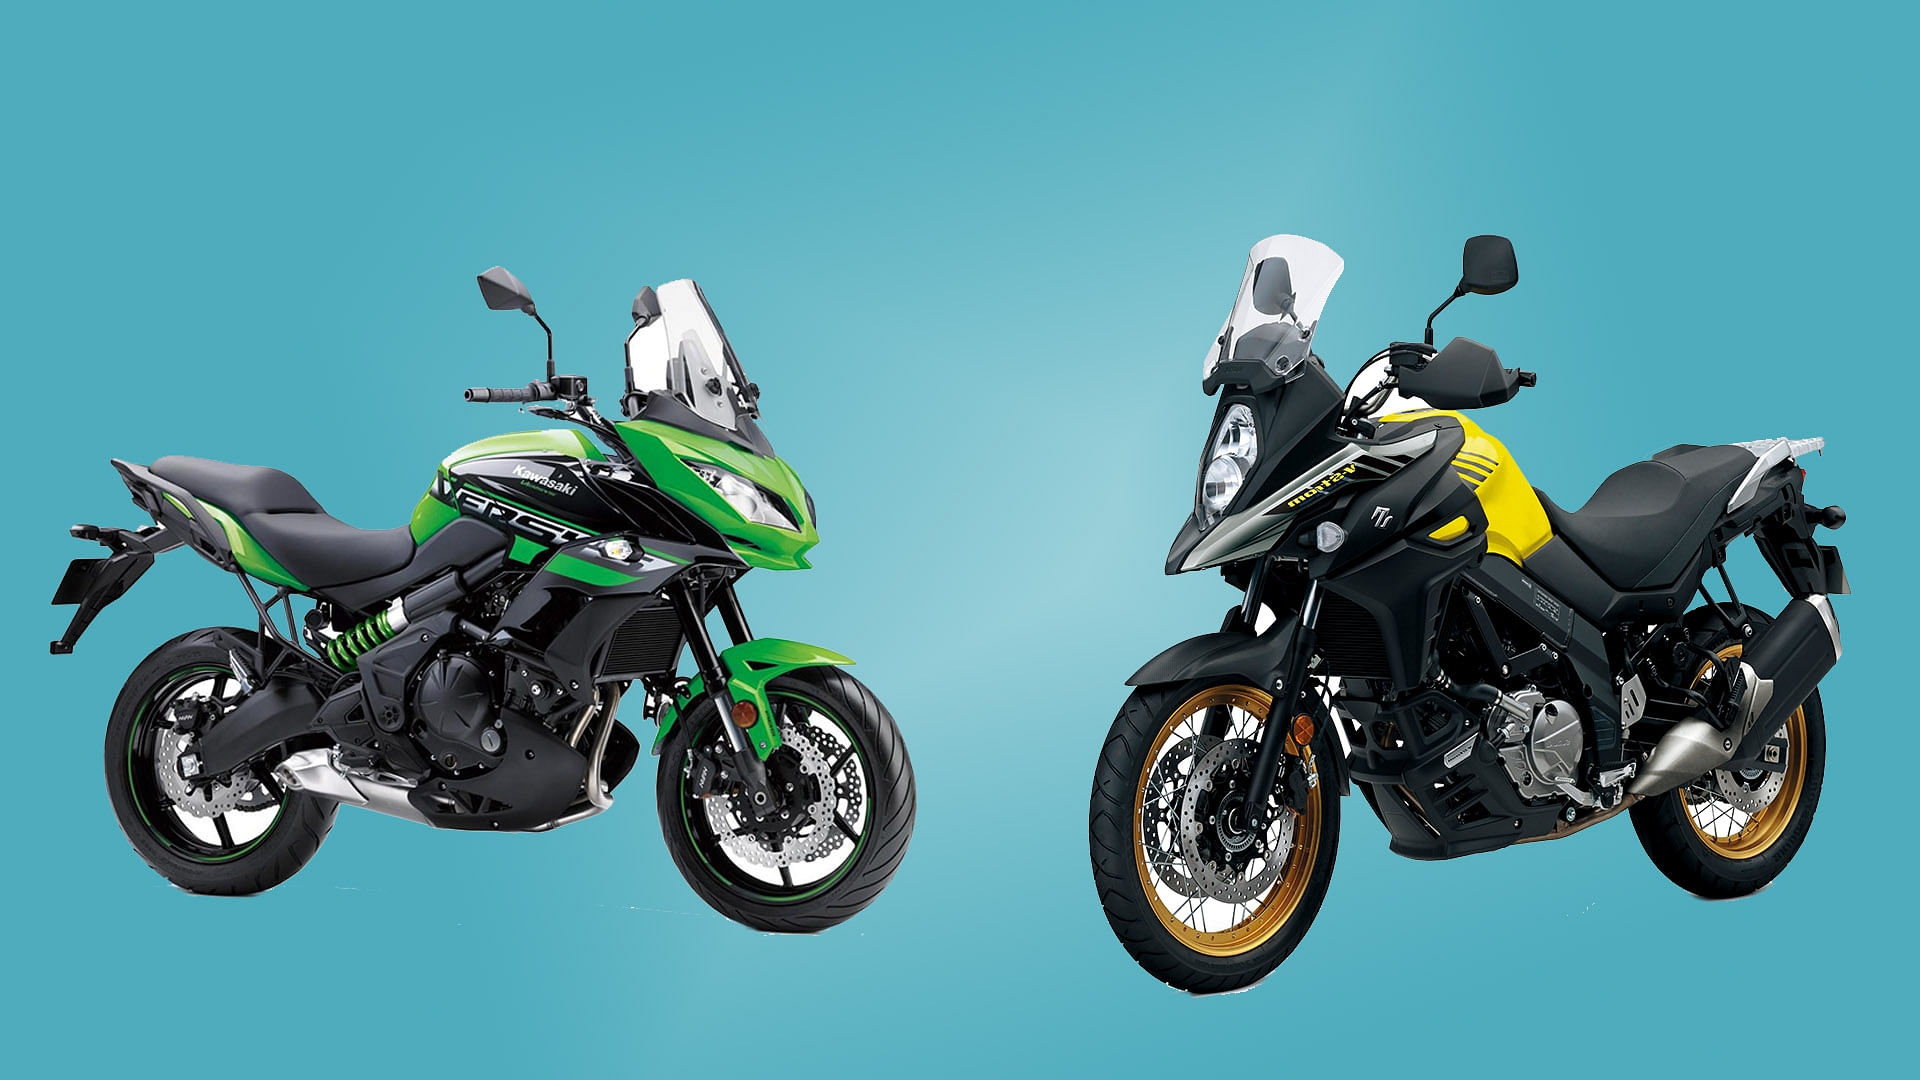 Kawasaki or Suzuki? Your choices are increasing by the day.